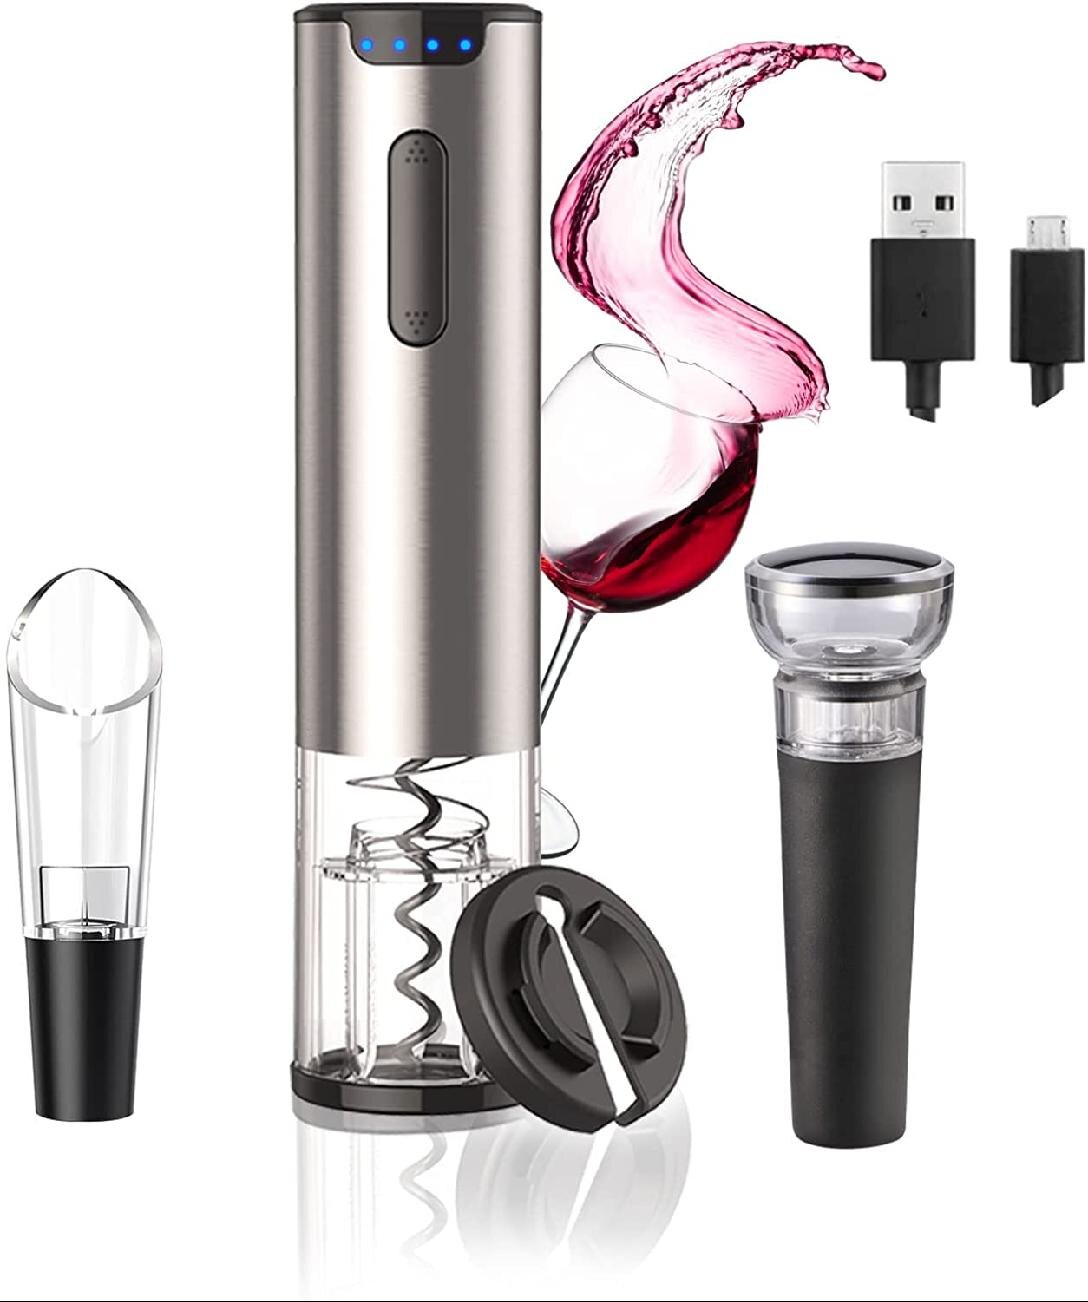 4 in 1 Set Electric Wine Opener Automatic Cordless Wine Bottle Corkscrew Gift